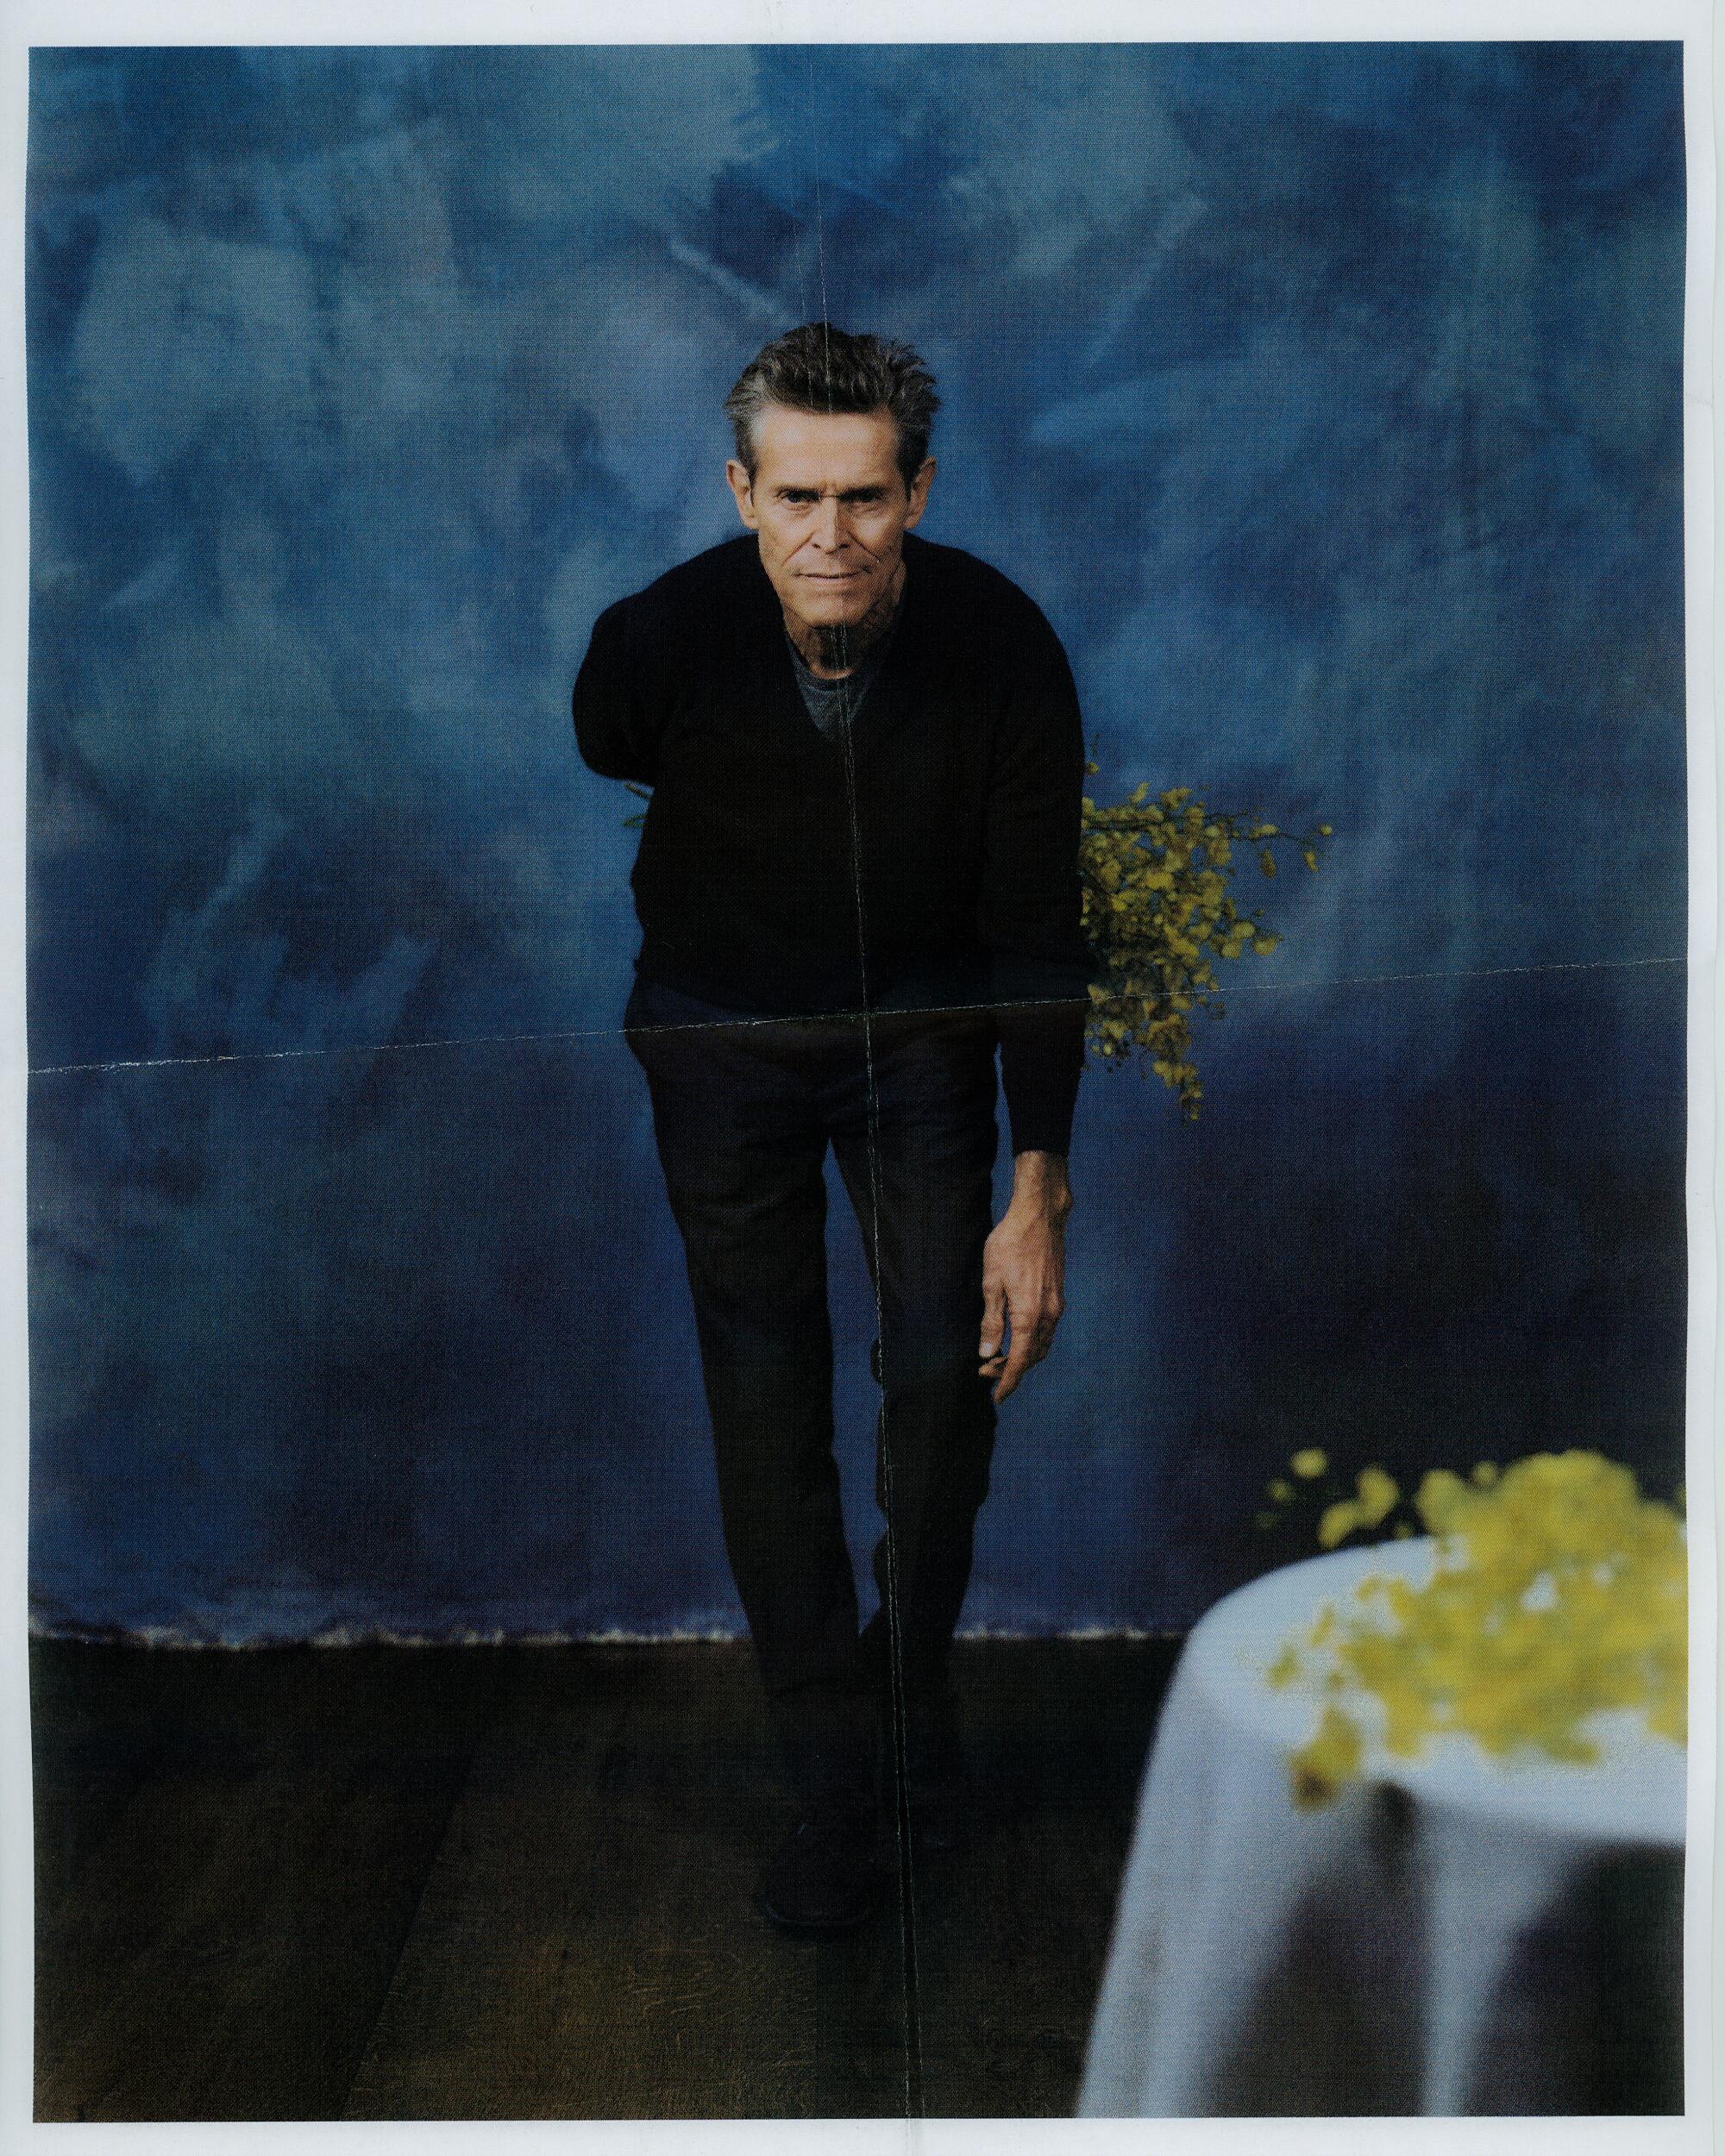 NEW YORK, NY - NOV 28: Willem Dafoe photographed in New York, NY on November 28, 2023. (Paul Yem / For The Times)